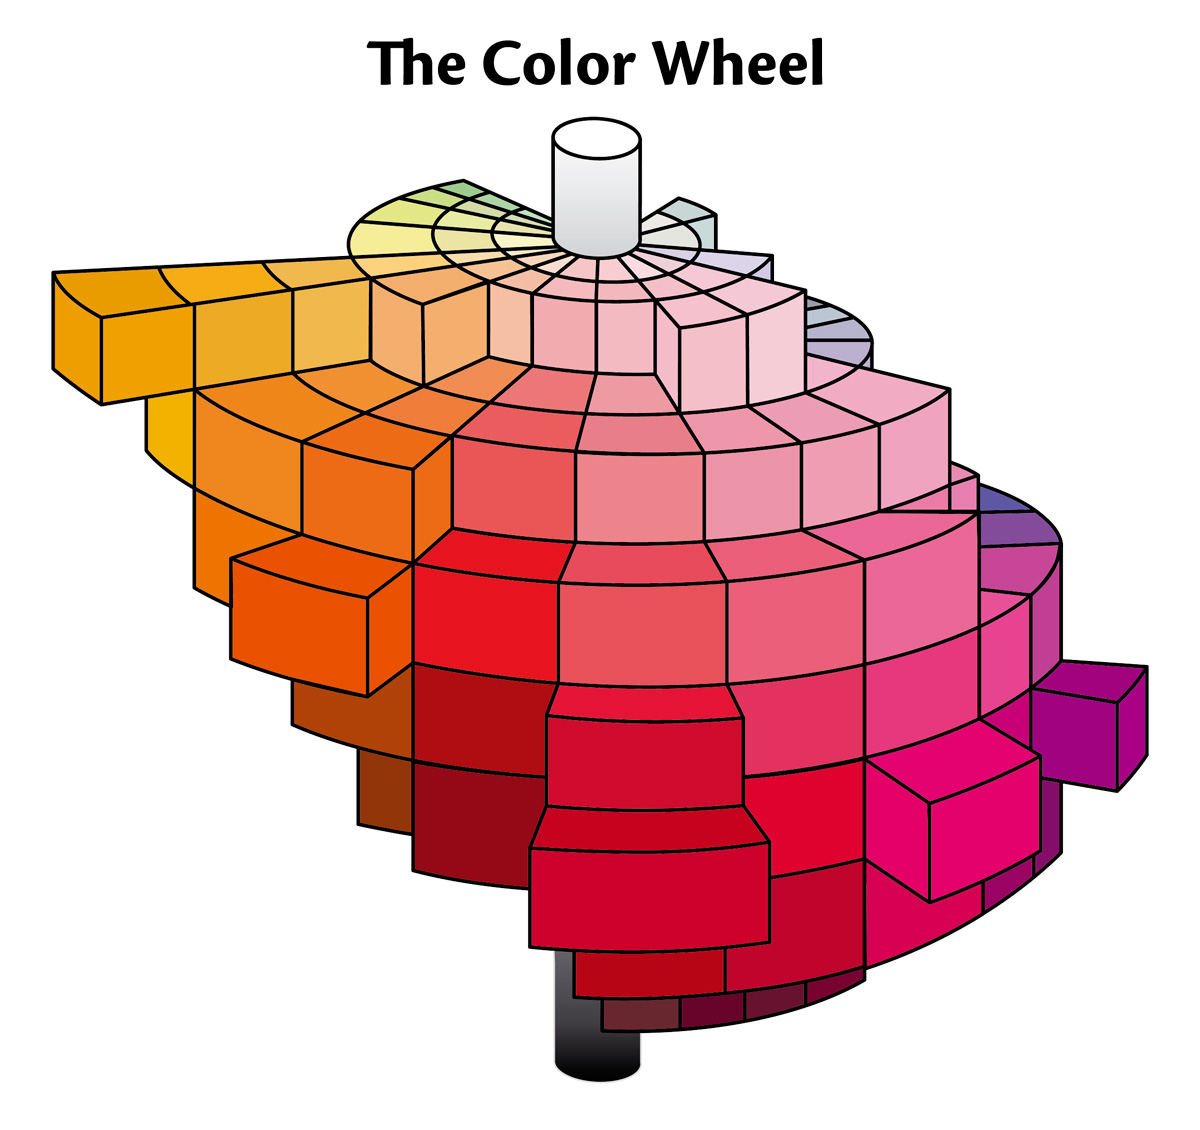 The three dimensions of color. Hues lie around a circle in the horizontal plane. Saturation lies in the horizonal plane, from zero in the center, to maximum at the outside edge. Tone varies in the vertical plane, from the lightest at the top to the darkest at the bottom.